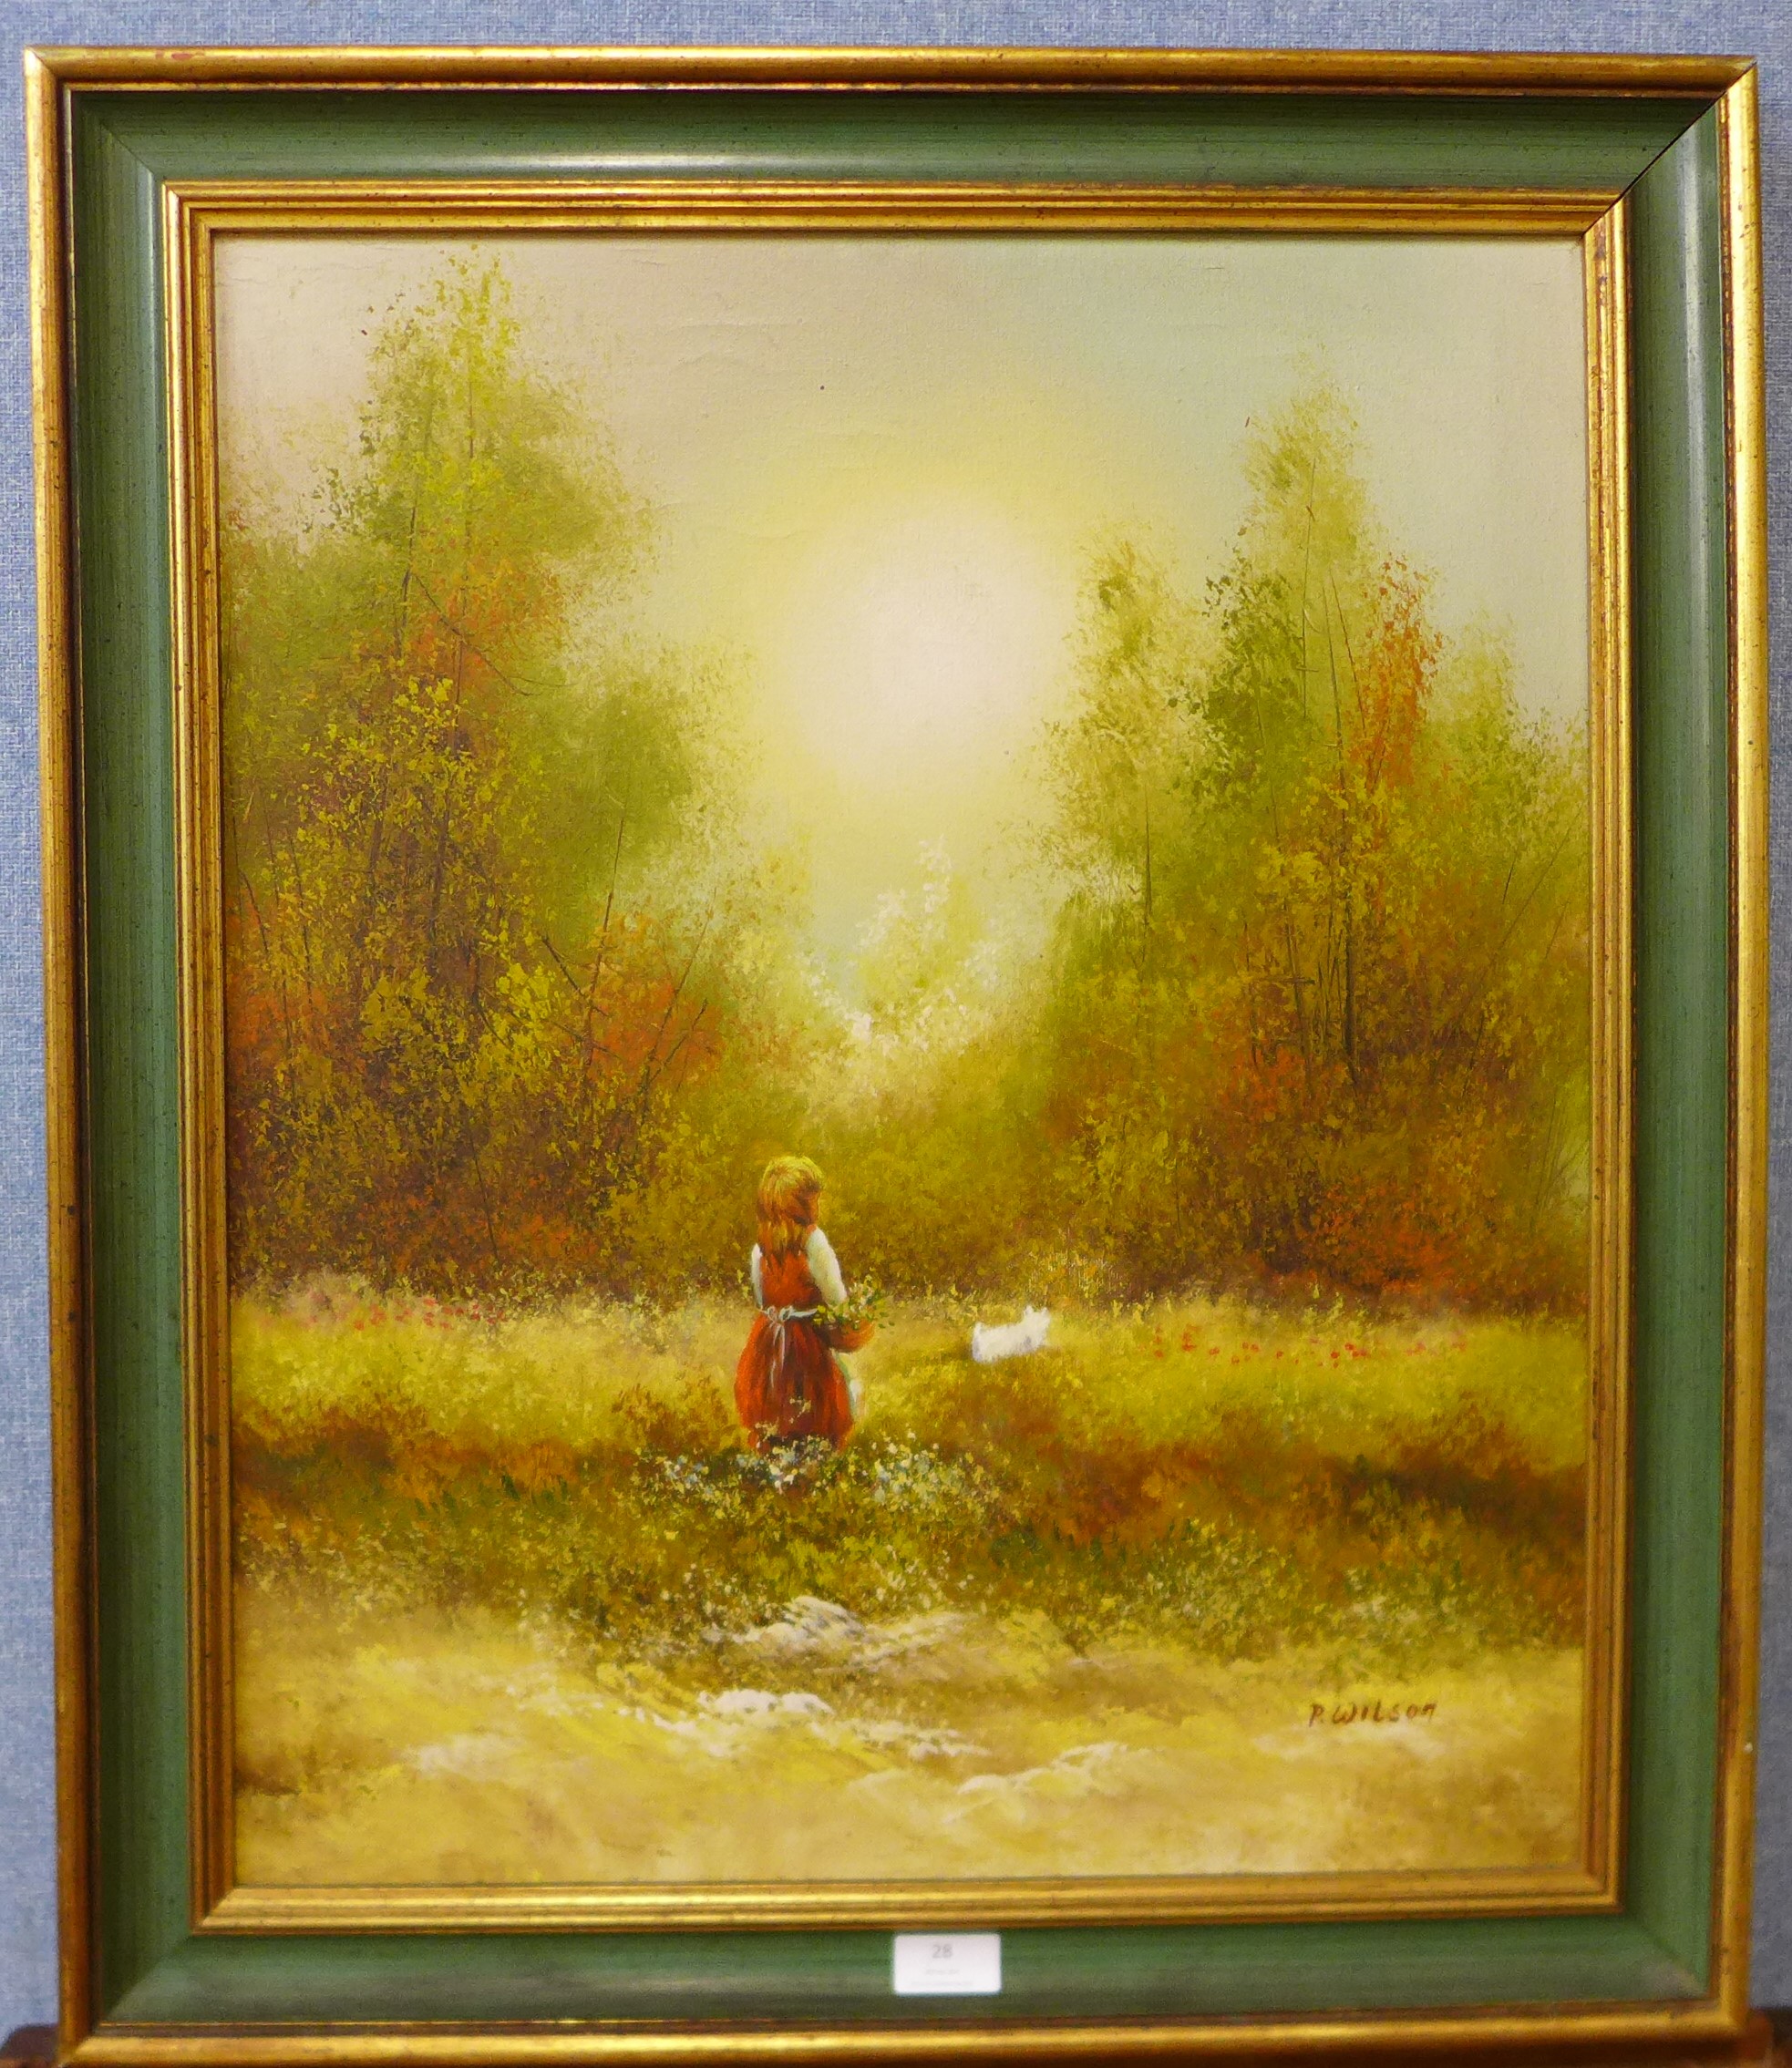 P. Wilson, landscape with girl and dog in a field, oil on canvas, 60 x 49cms, framed - Image 2 of 3